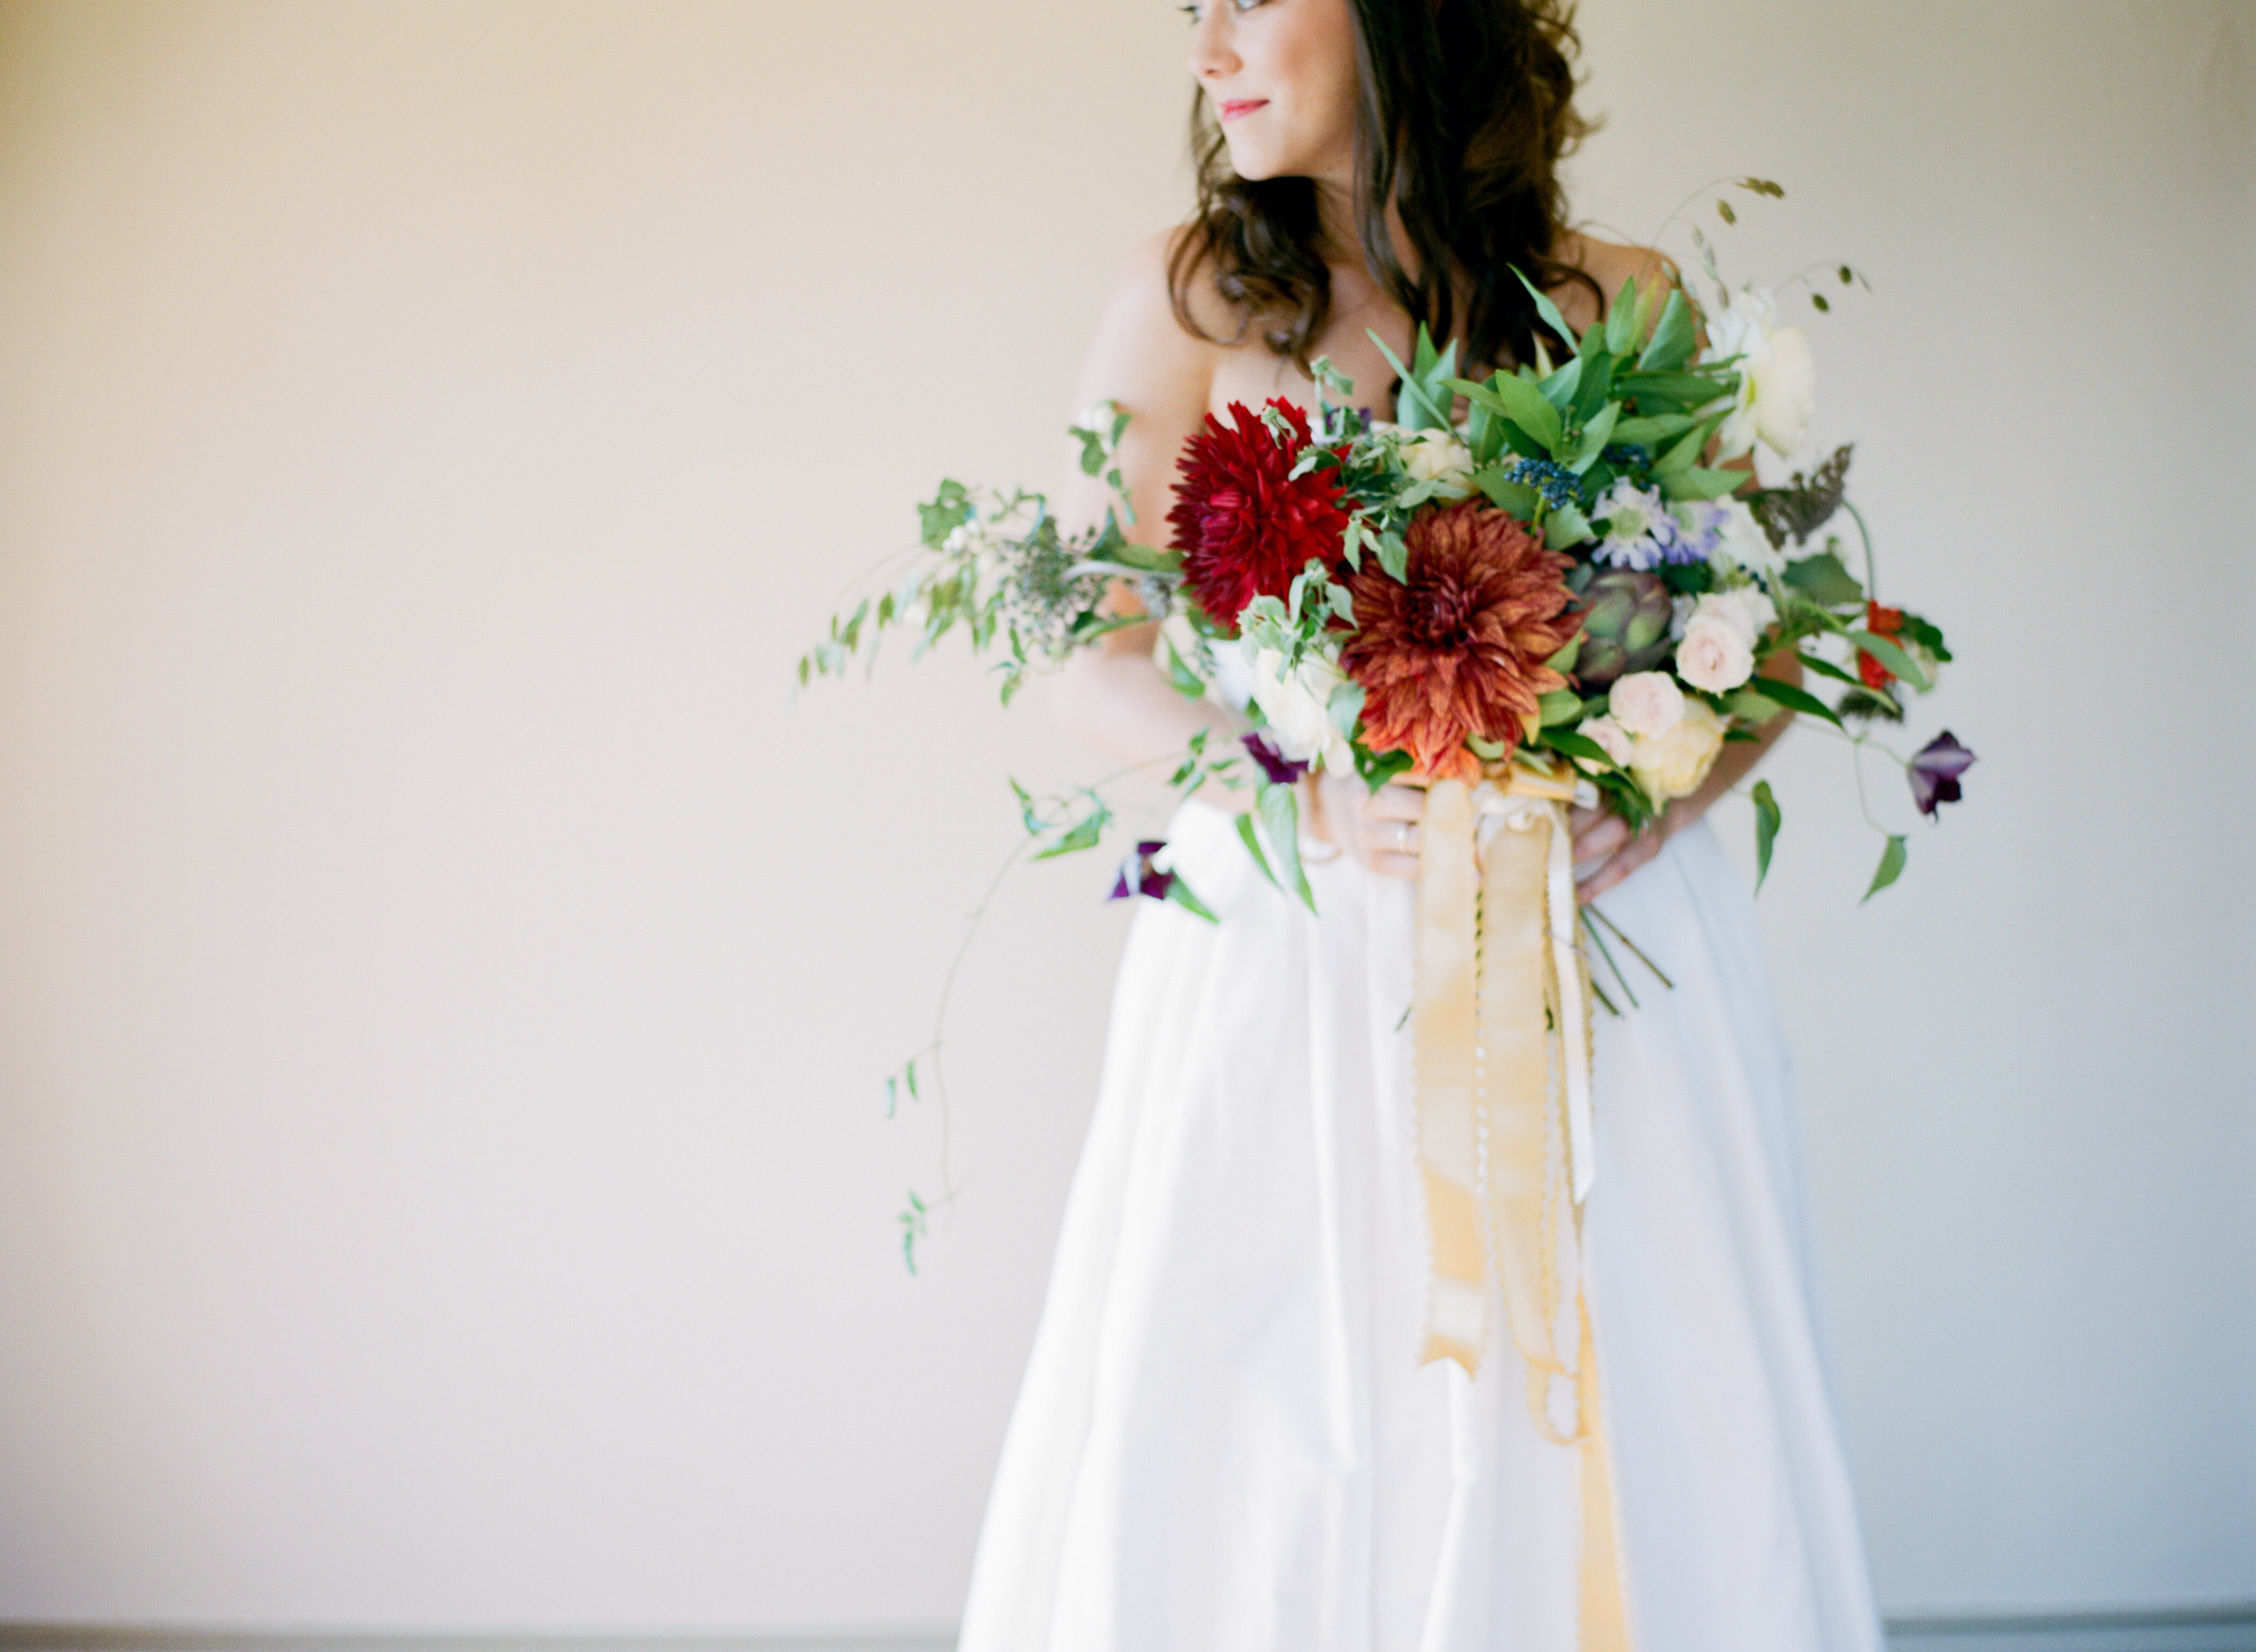 Red Dahlia Bridal Bouquet | The Day's Design | Cory Weber Photography